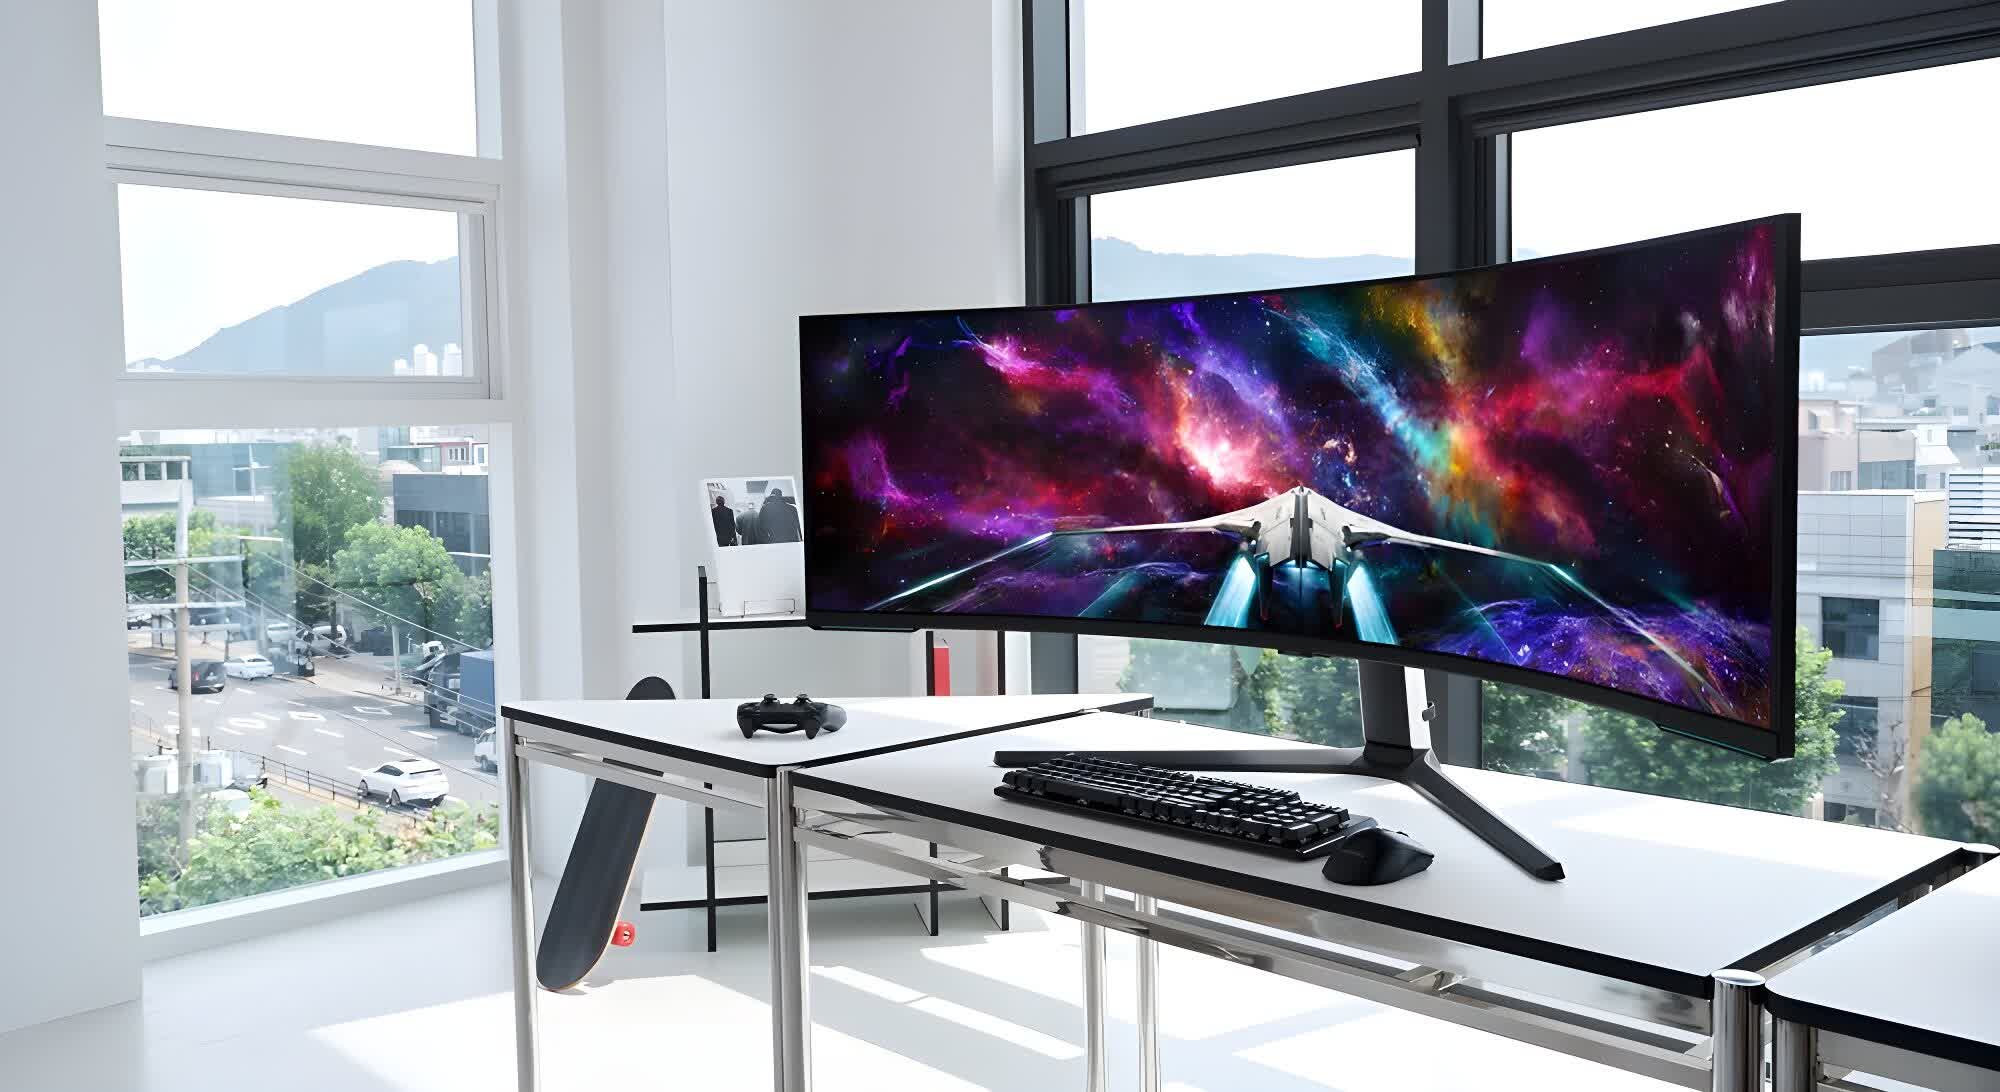 Samsung reveals its 57-inch dual UHD Odyssey Neo G9 and new 55-inch Odyssey Ark monitors